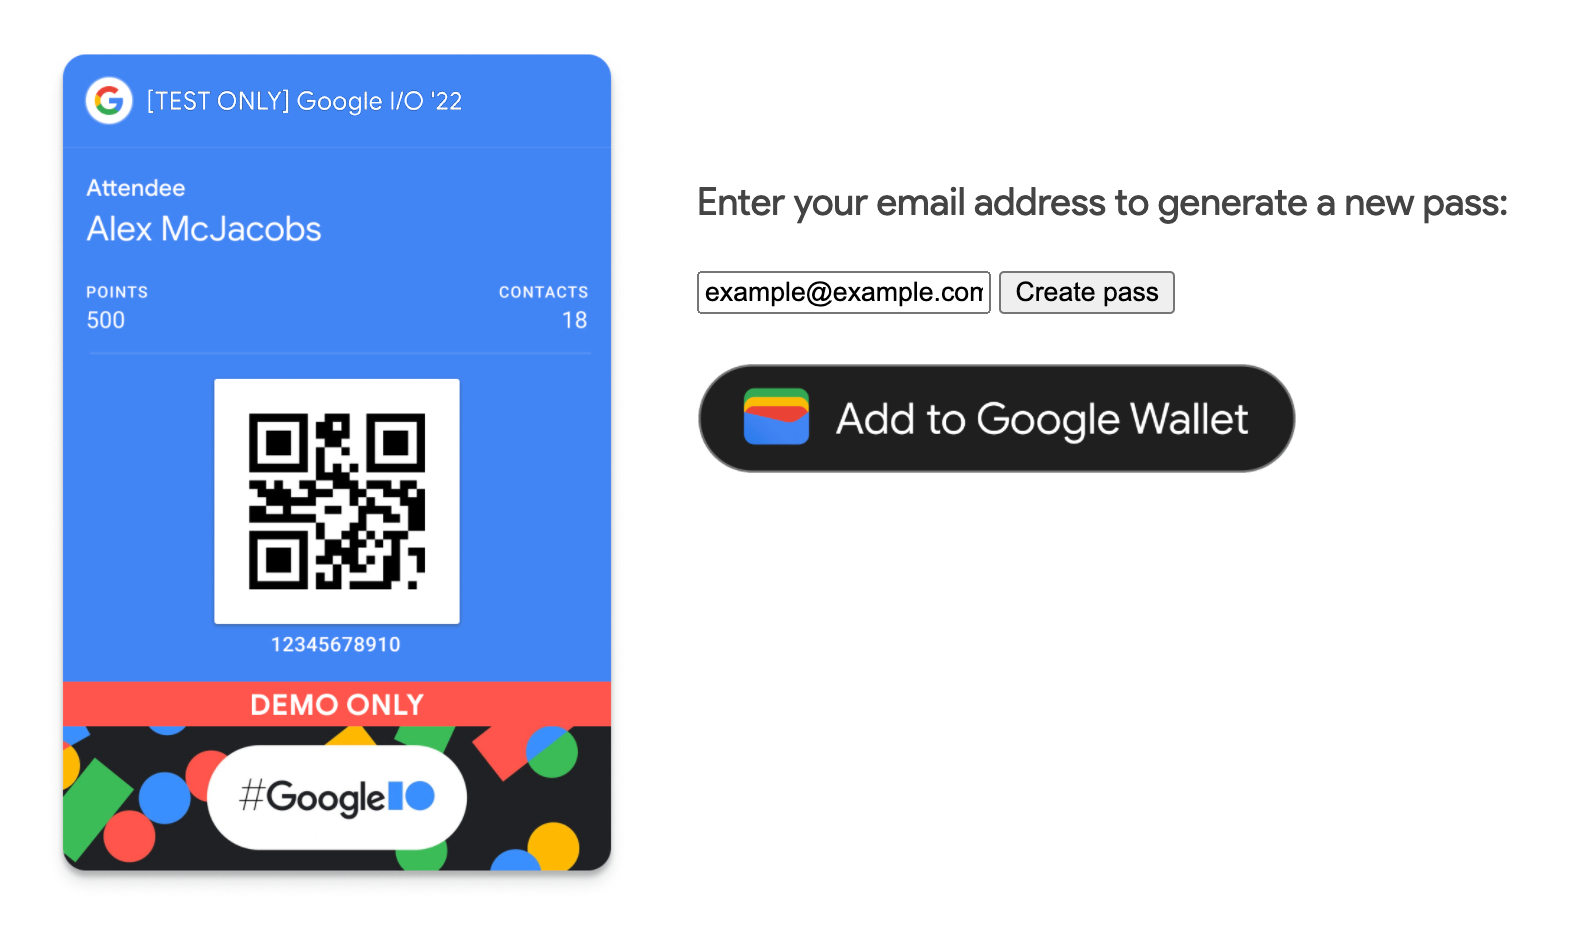 Introducing the new Google Wallet experience on the web